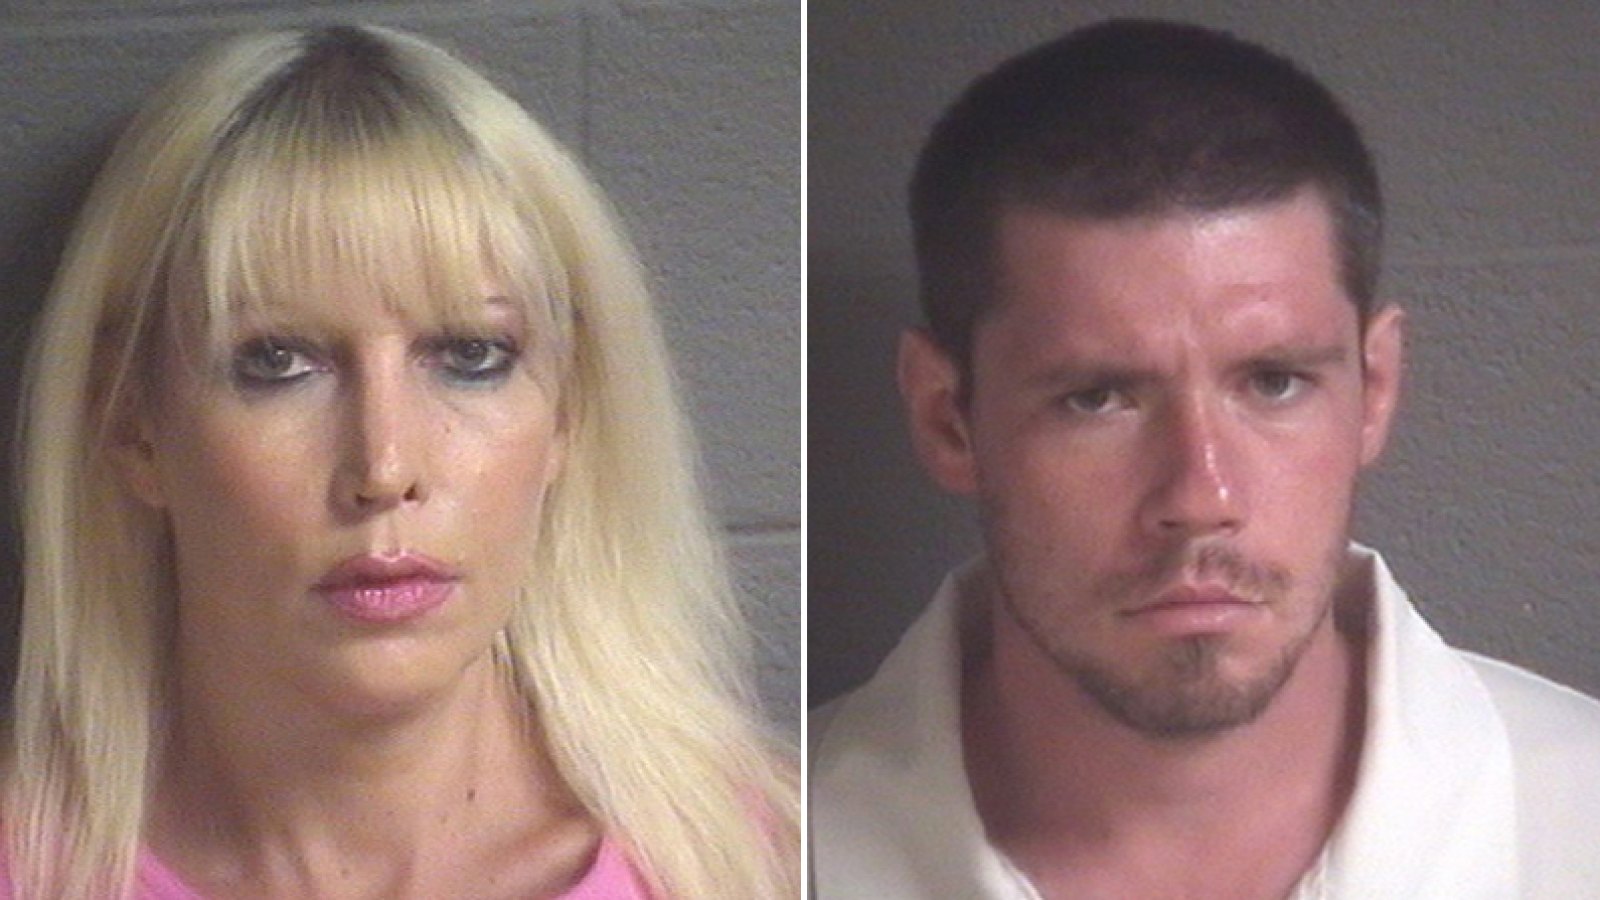 Dark Web Incest Porn - North Carolina Mom and Son Arrested, Charged With Incest